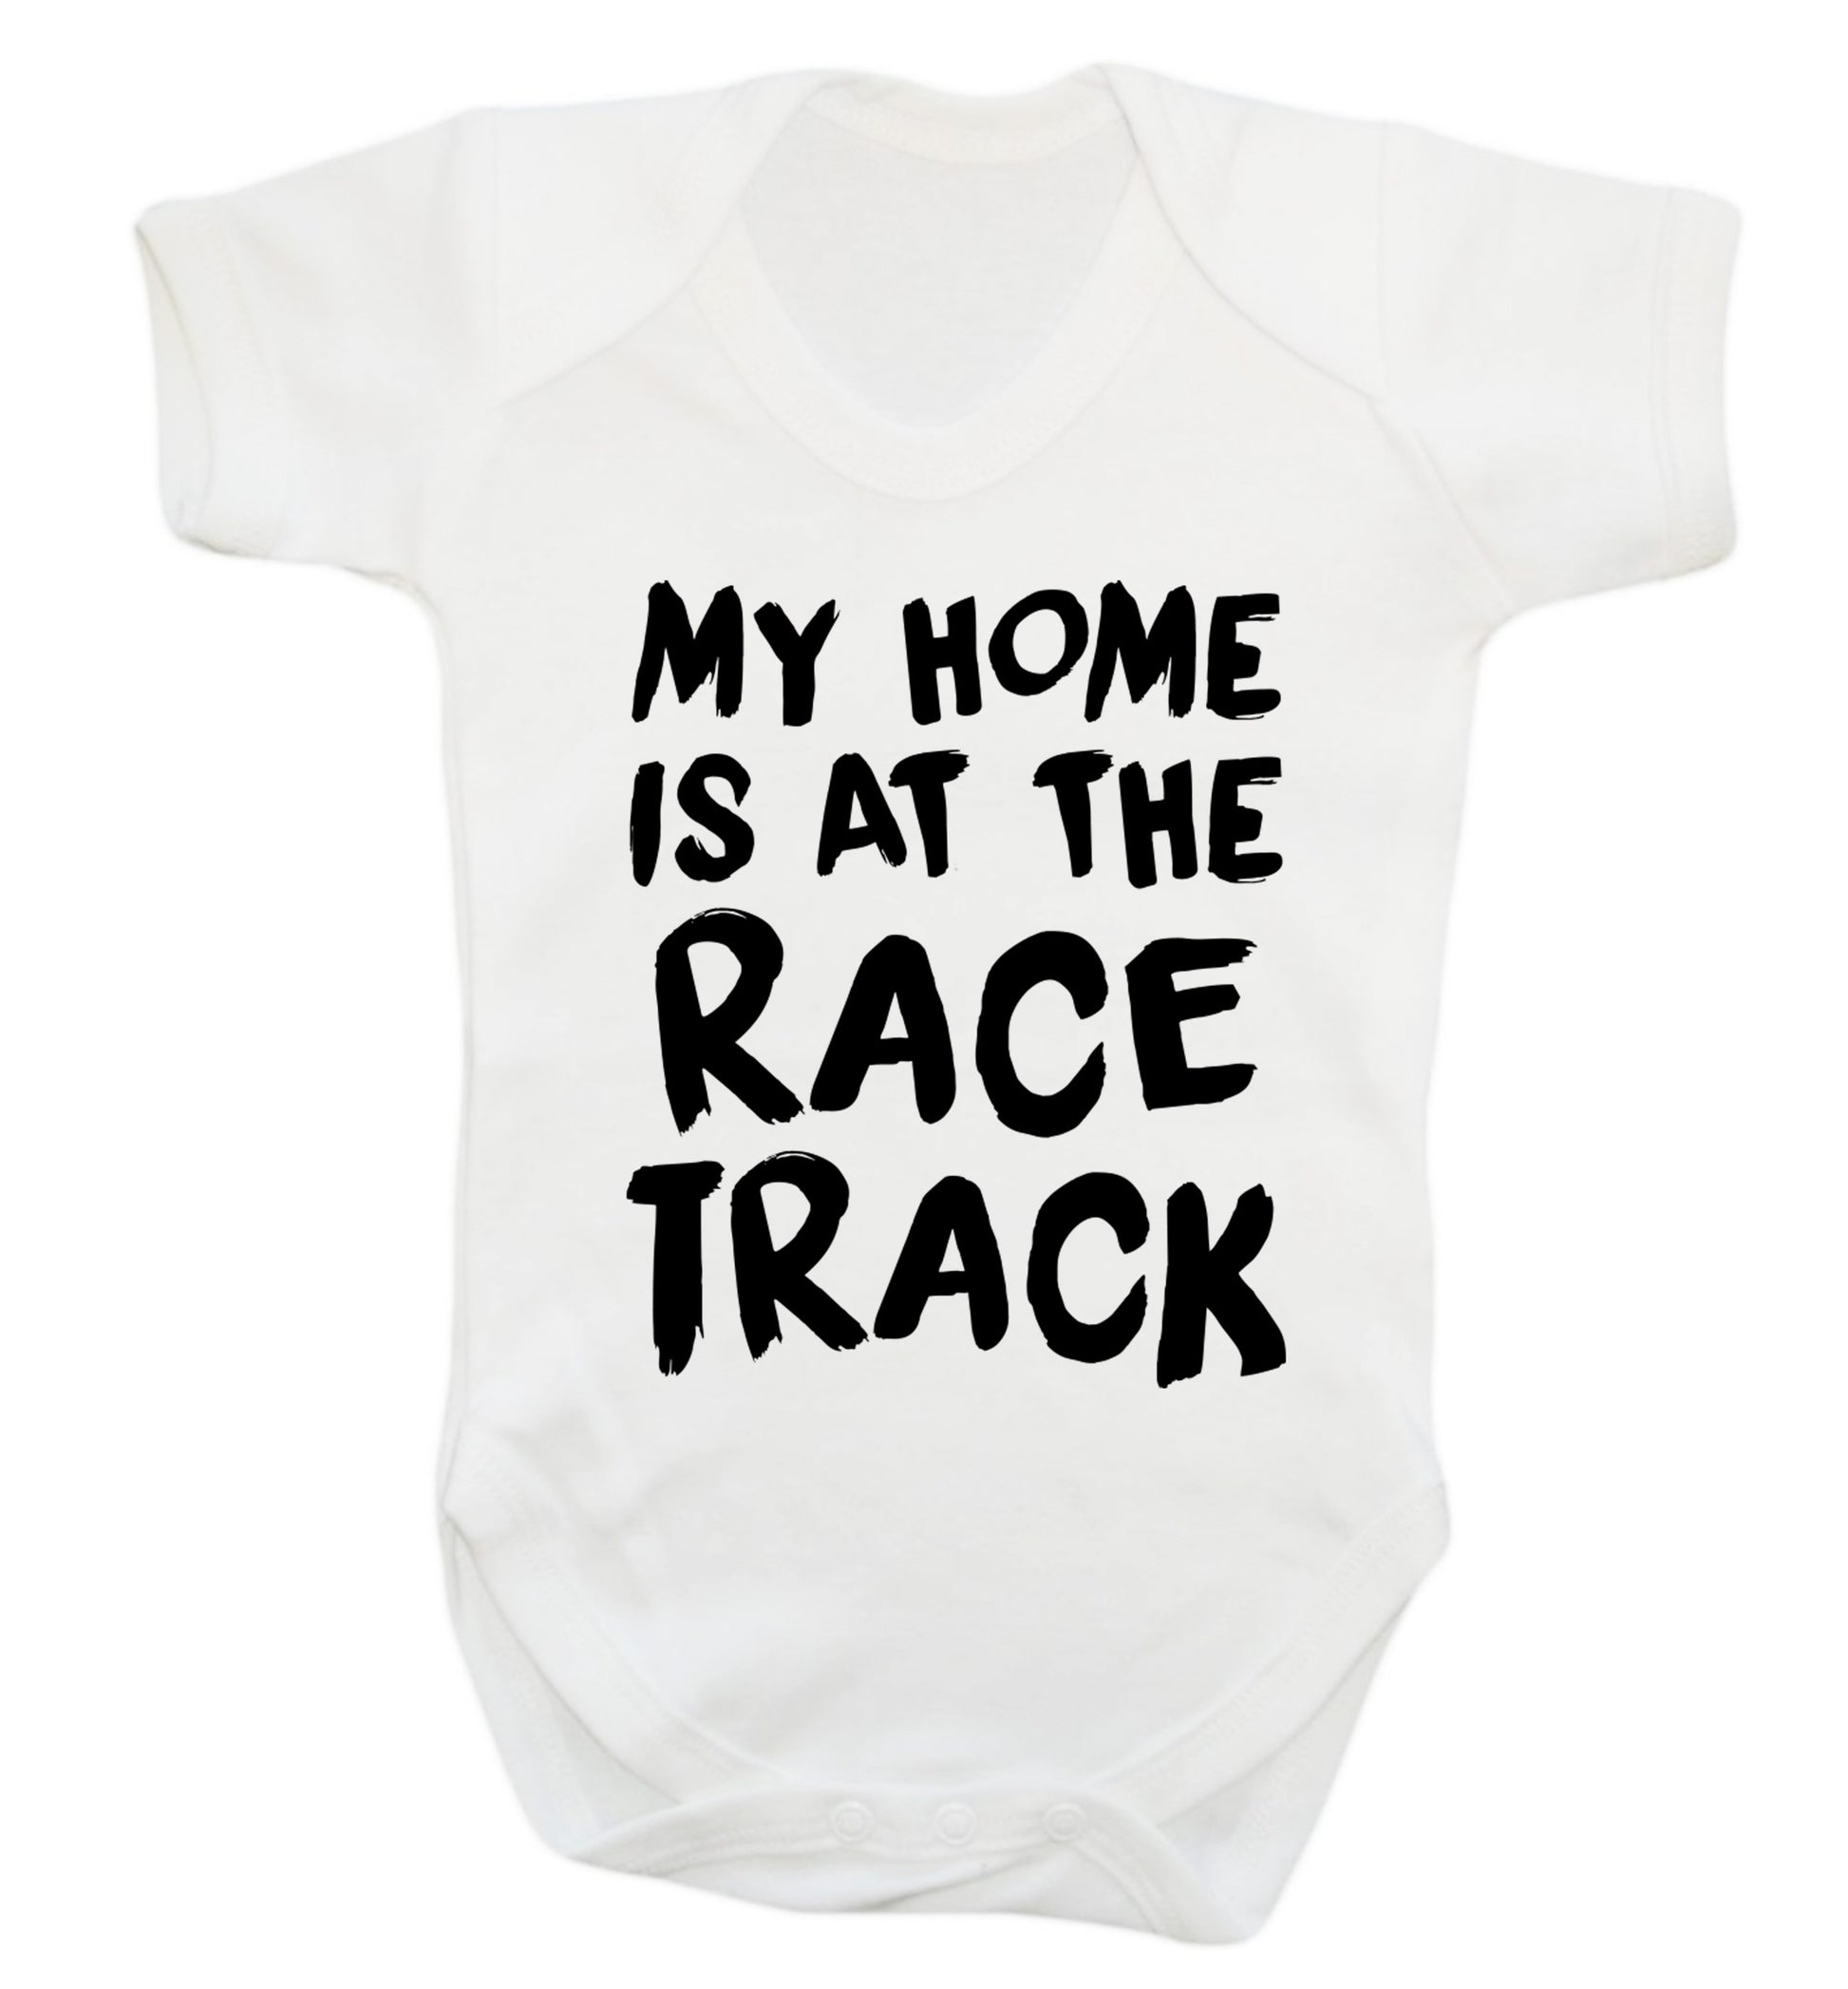 My home is at the race track Baby Vest white 18-24 months